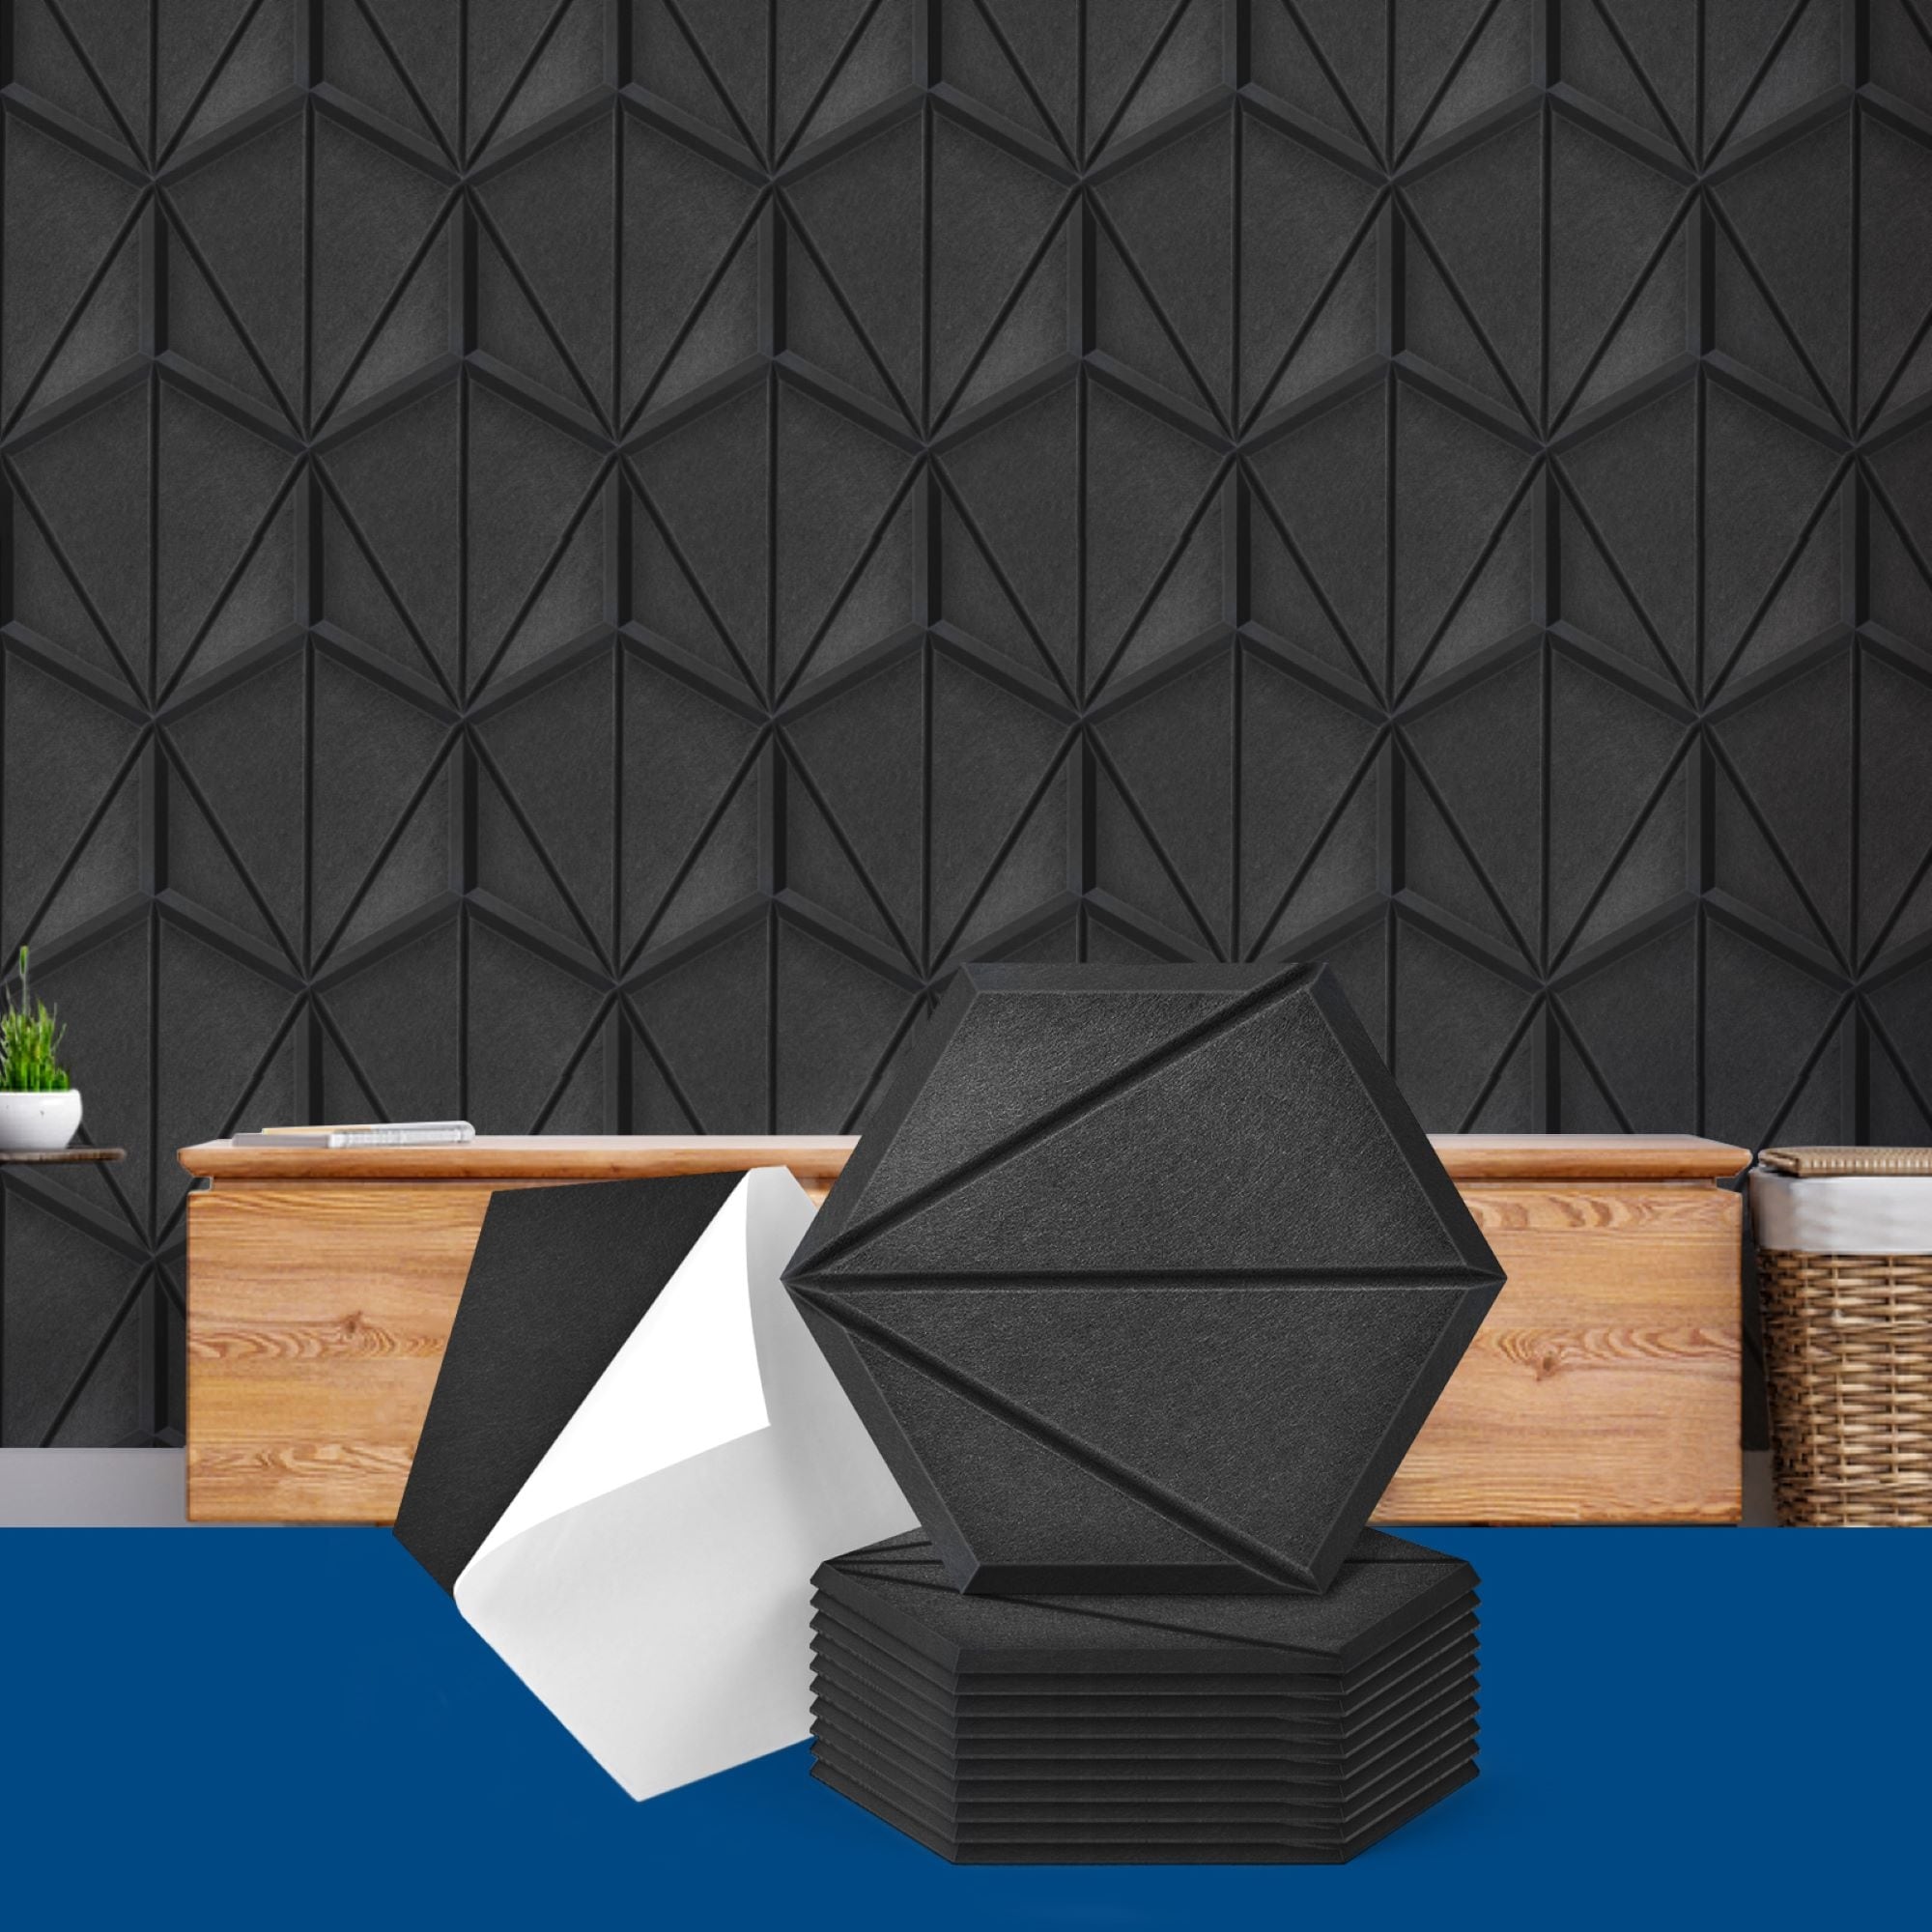 Hexagonal Self-adhesive Acoustic Panels Sound Absorbing Soundproof